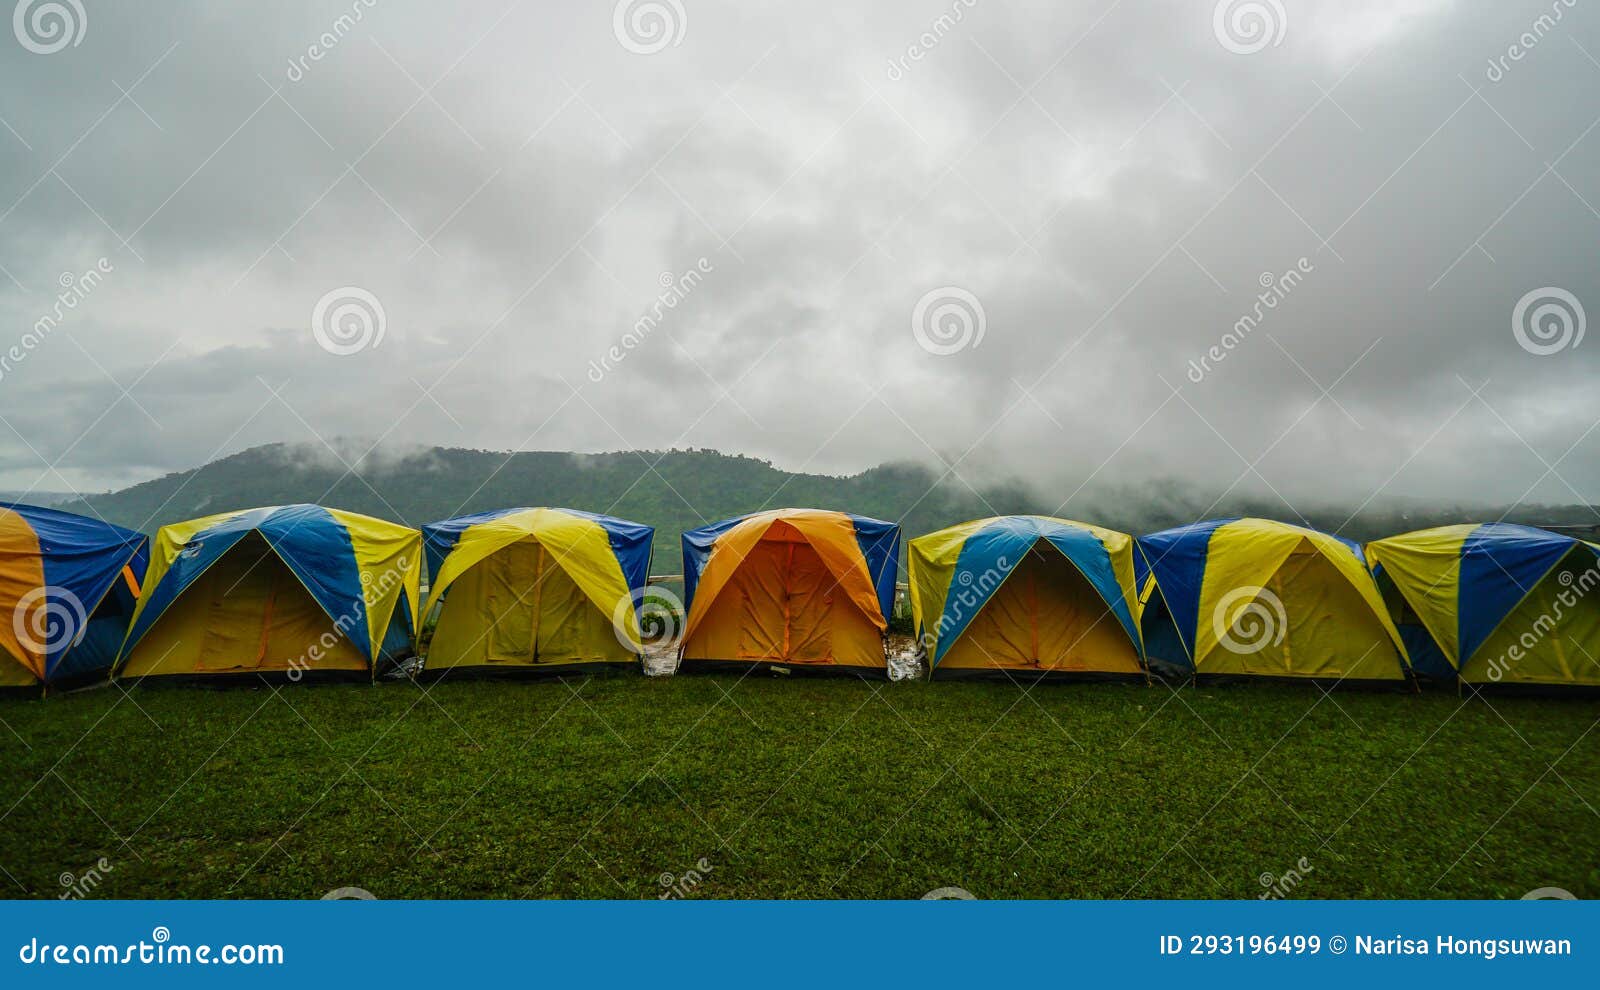 tent in camping with flog and mountain view. camping activities in rain-filled holiday. tent on campsite by the hill in rainy day